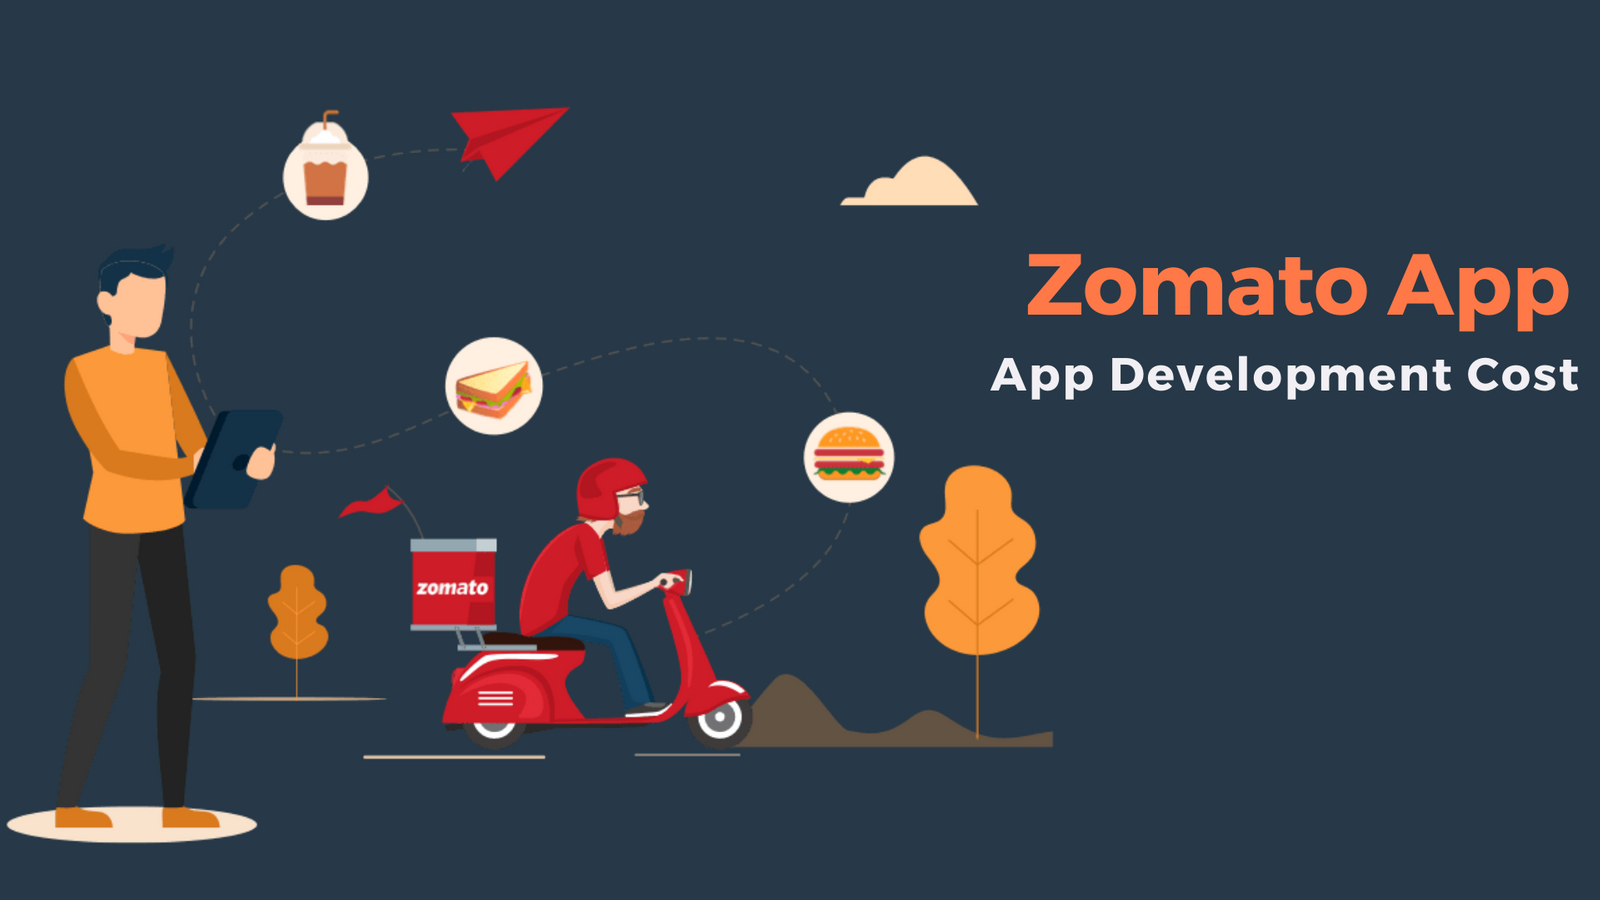 How much does it cost to develop app like Zomato?